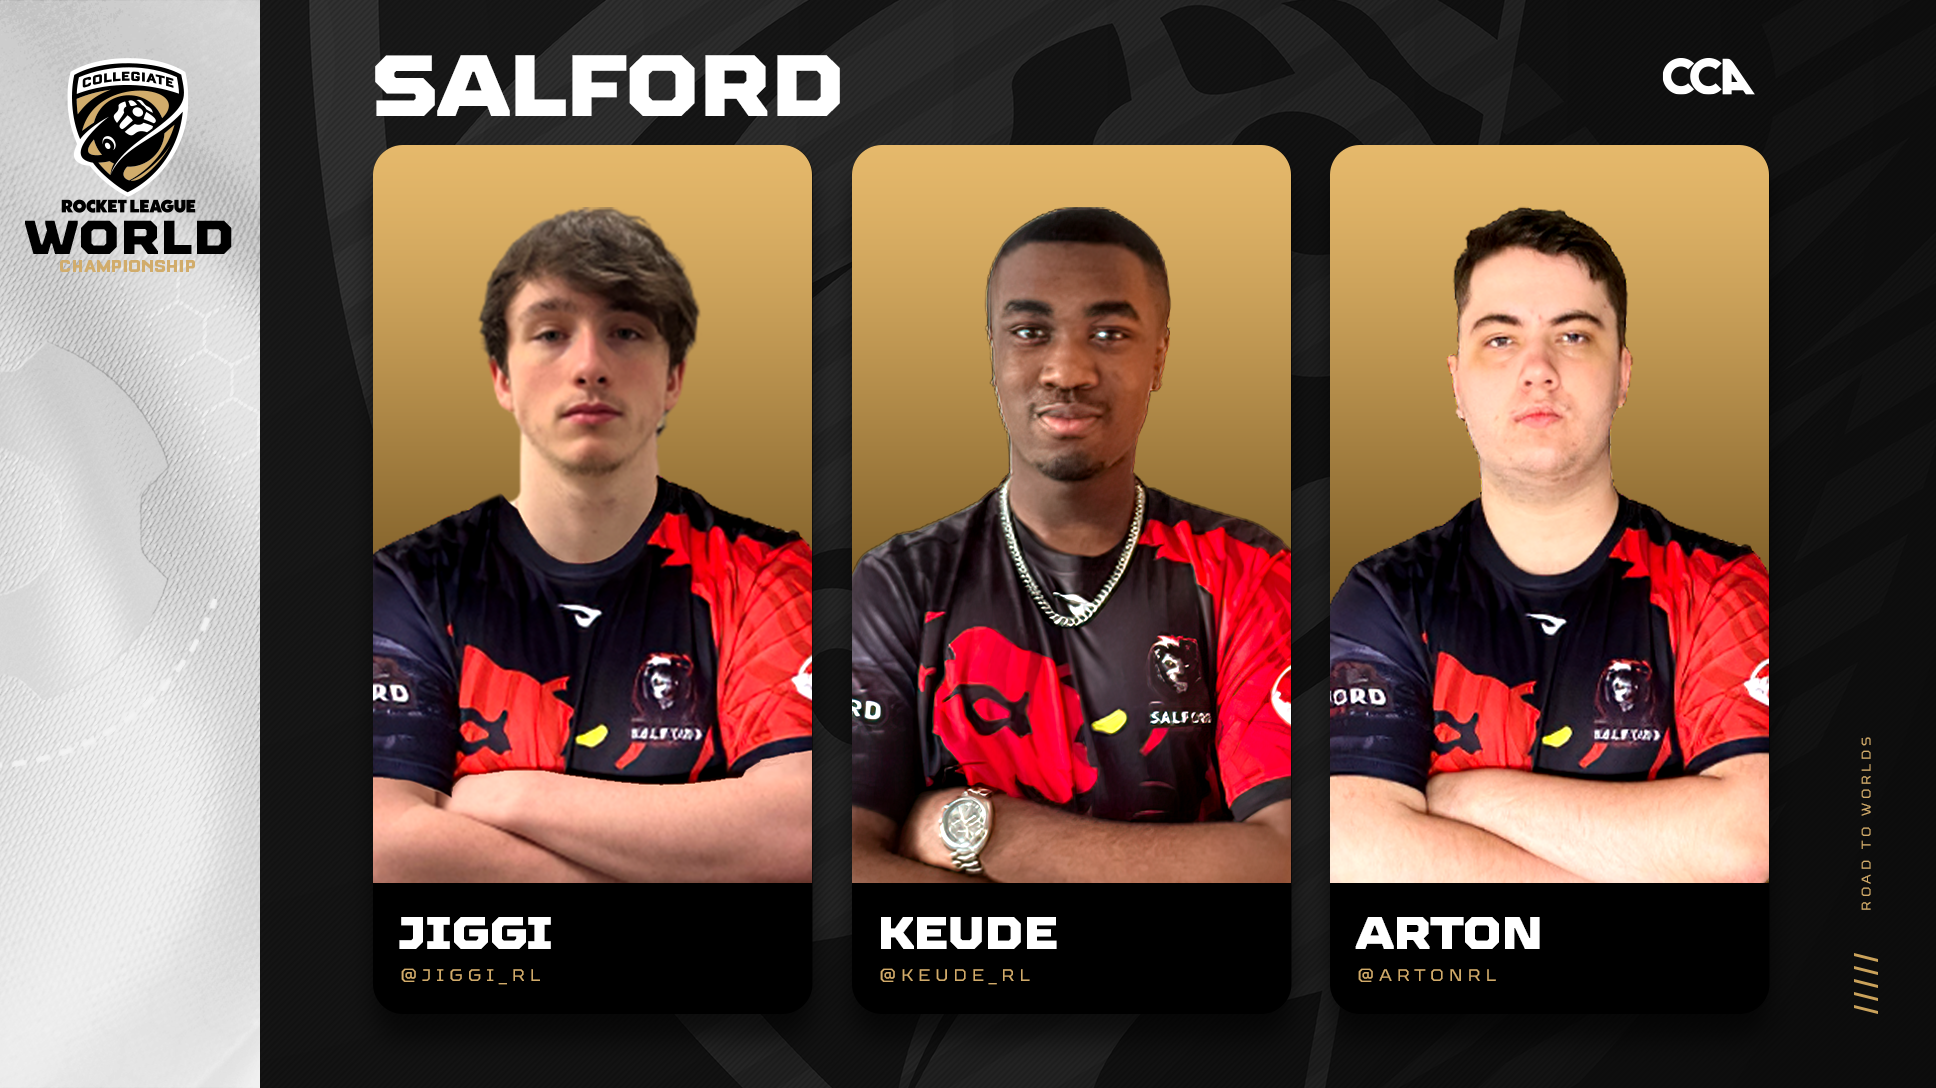 University of Salford Road to Worlds header with images of Jiggi, Keude, and Arton